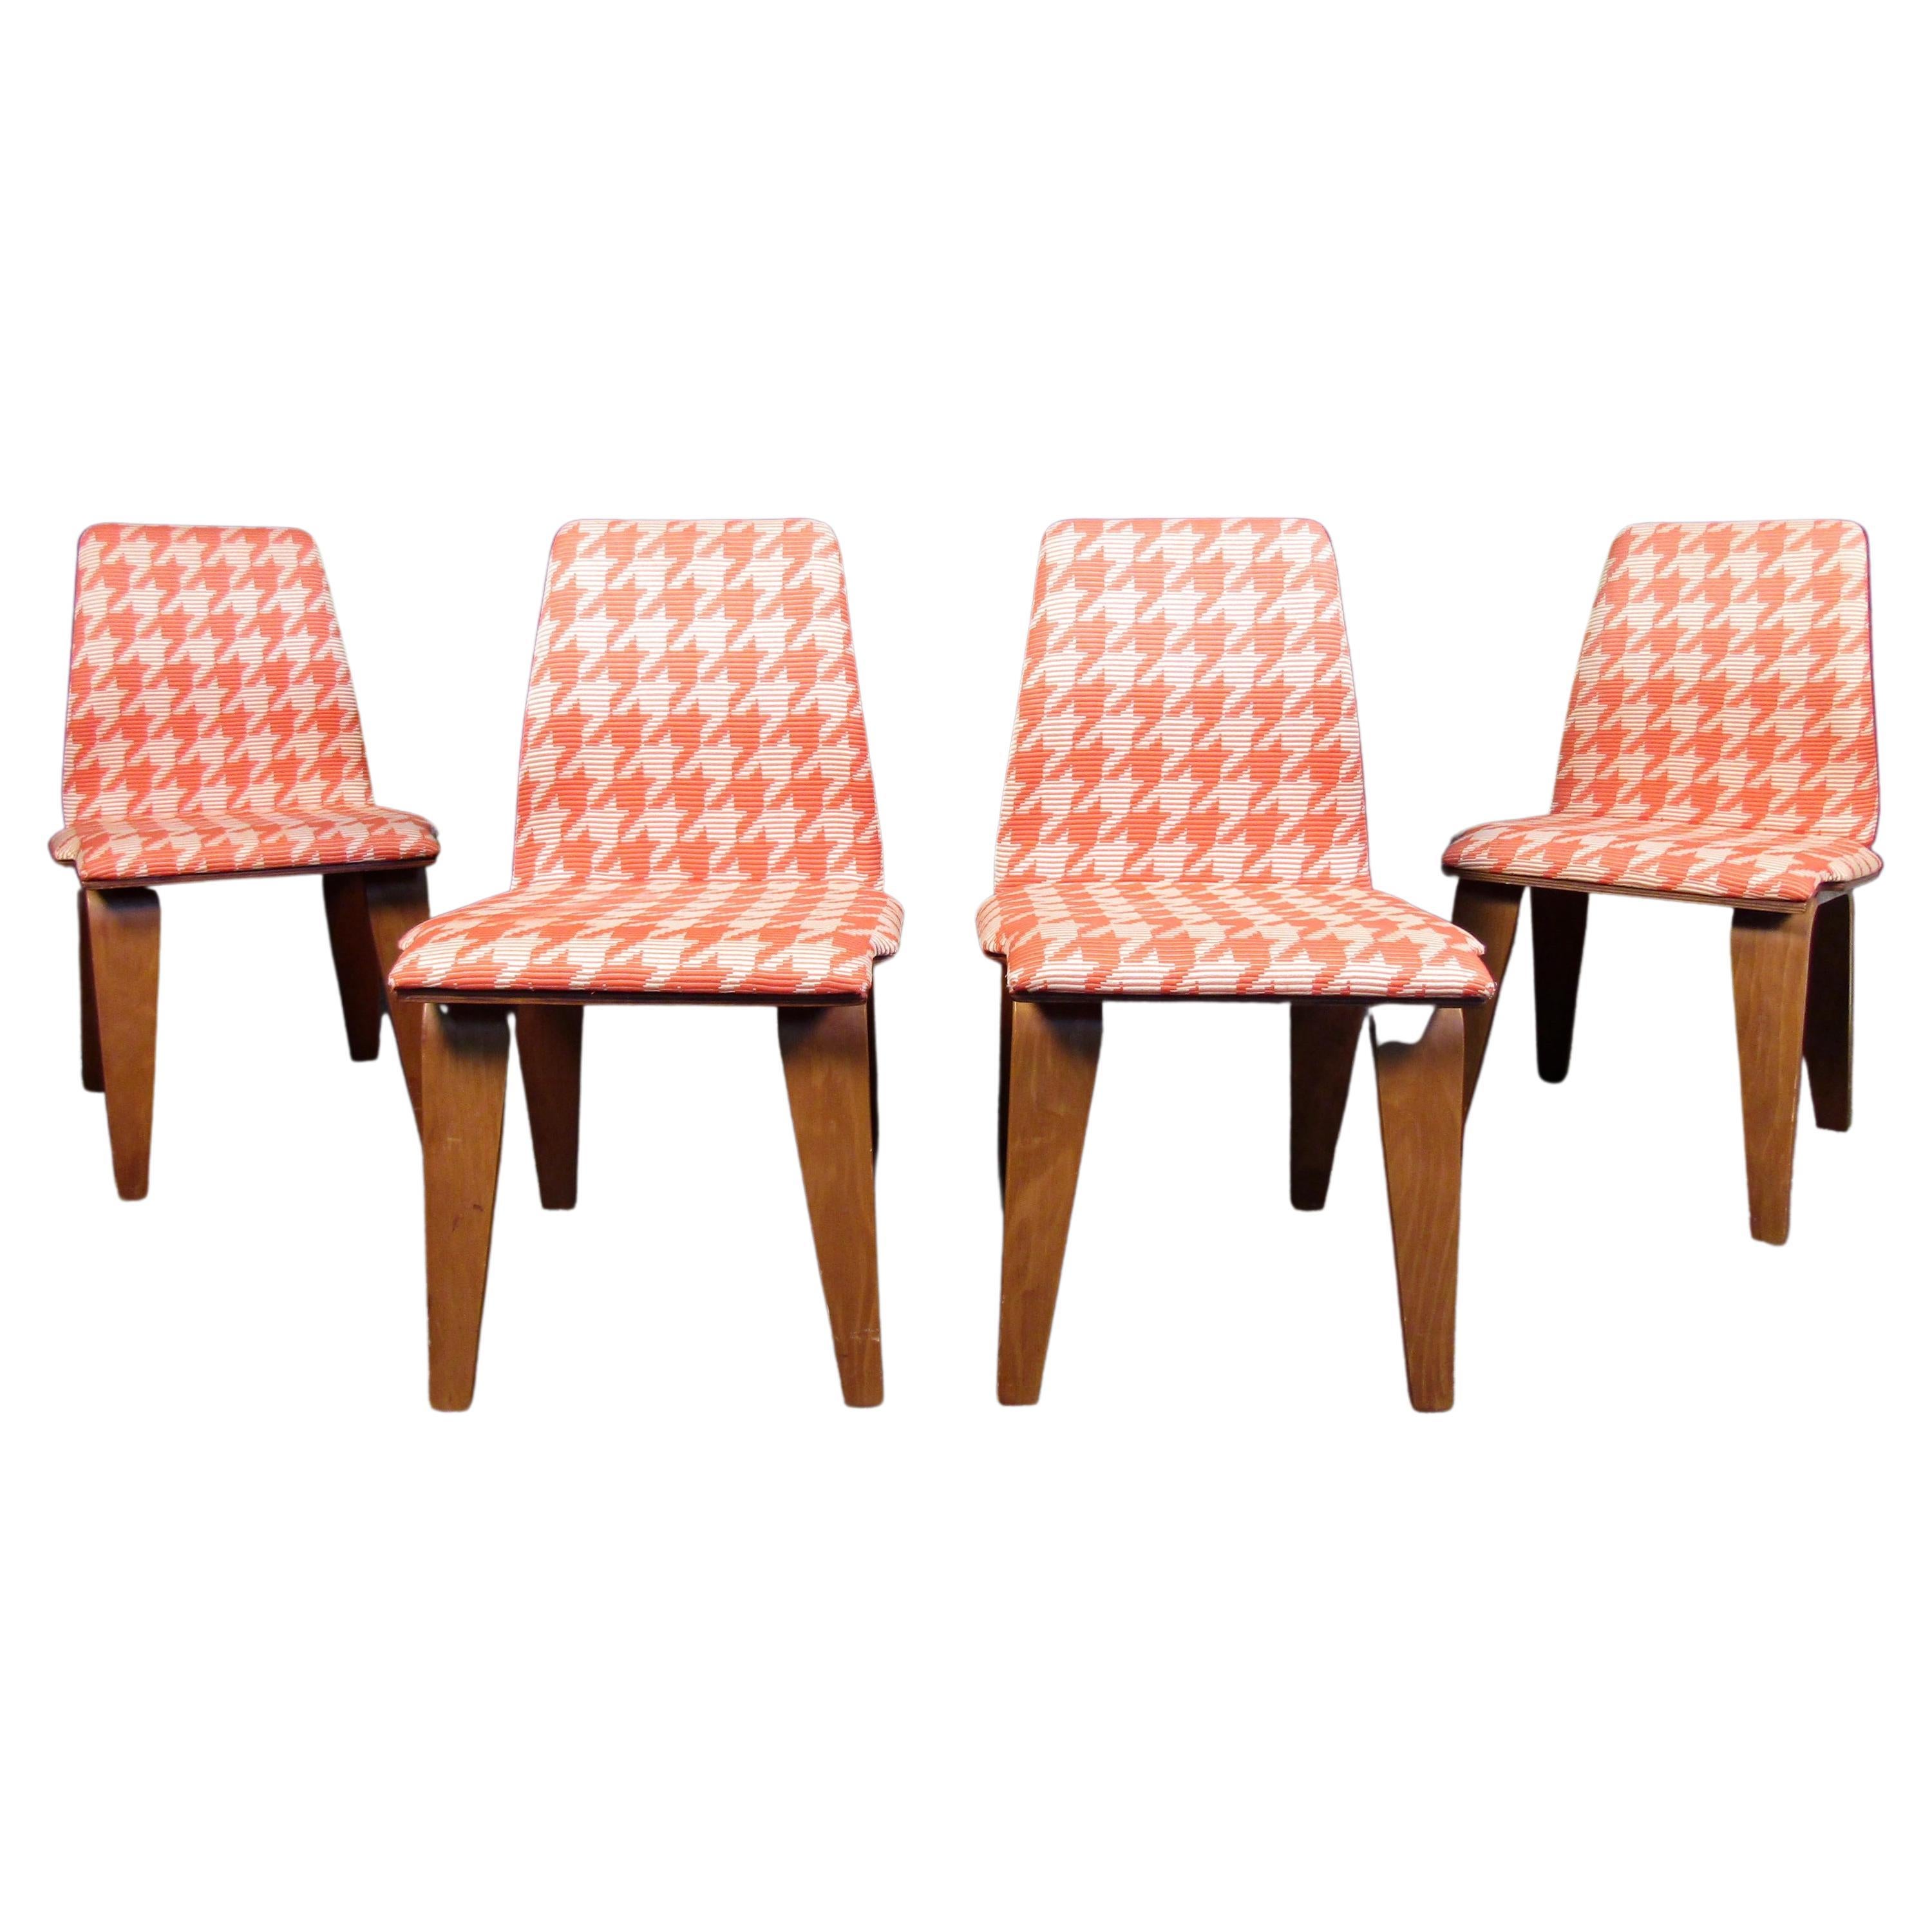 Set of Four Hounds-Tooth Bentwood Dining Chairs